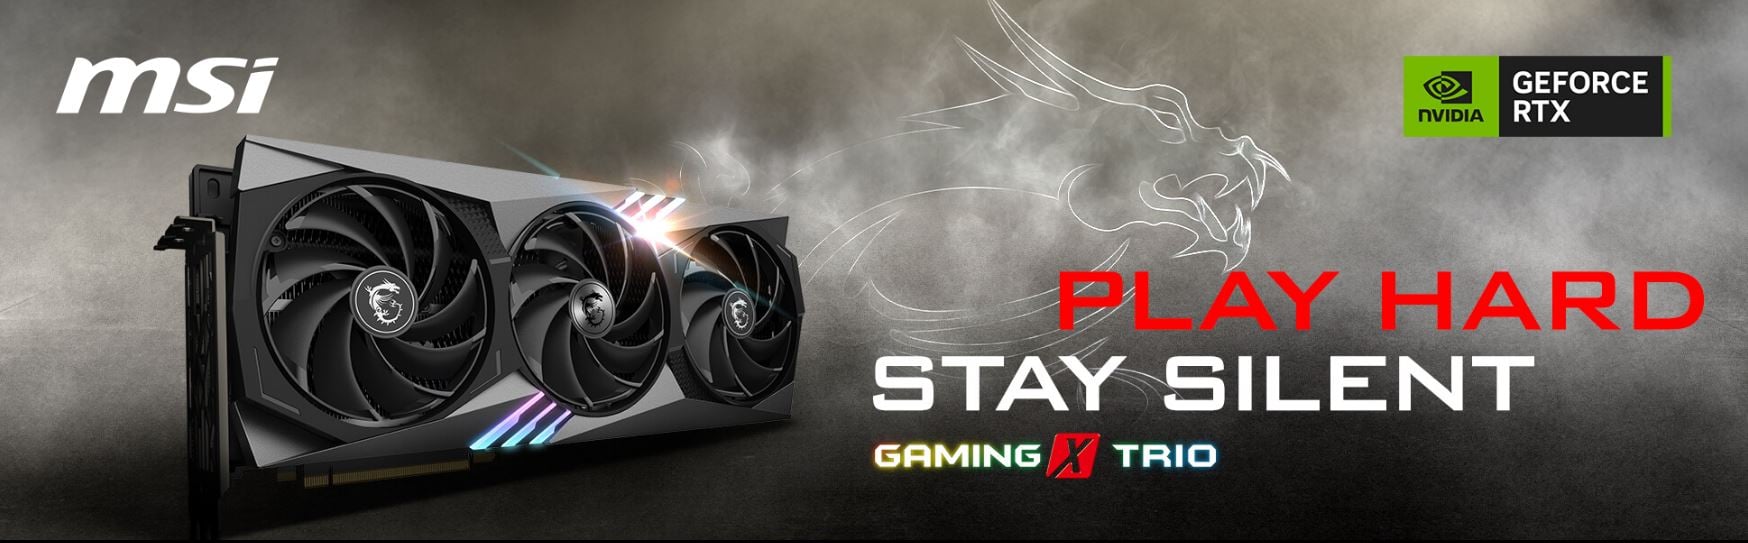 Price history for MSI GeForce RTX 4080 Gaming X Trio - Pangoly